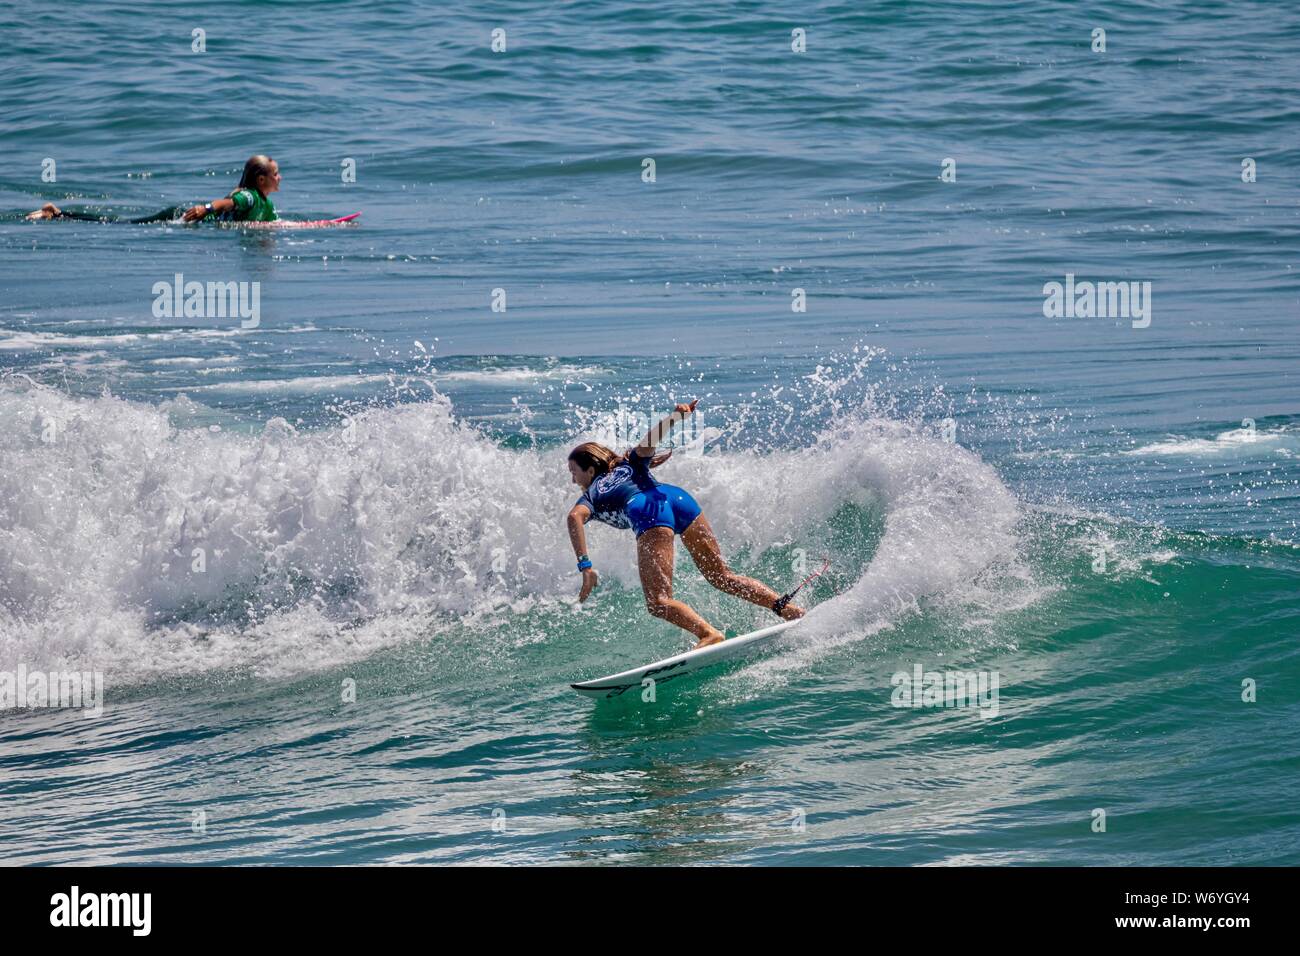 Serena Nava of the USA competing in the Vans US Open of Surfing 2019 Stock  Photo - Alamy